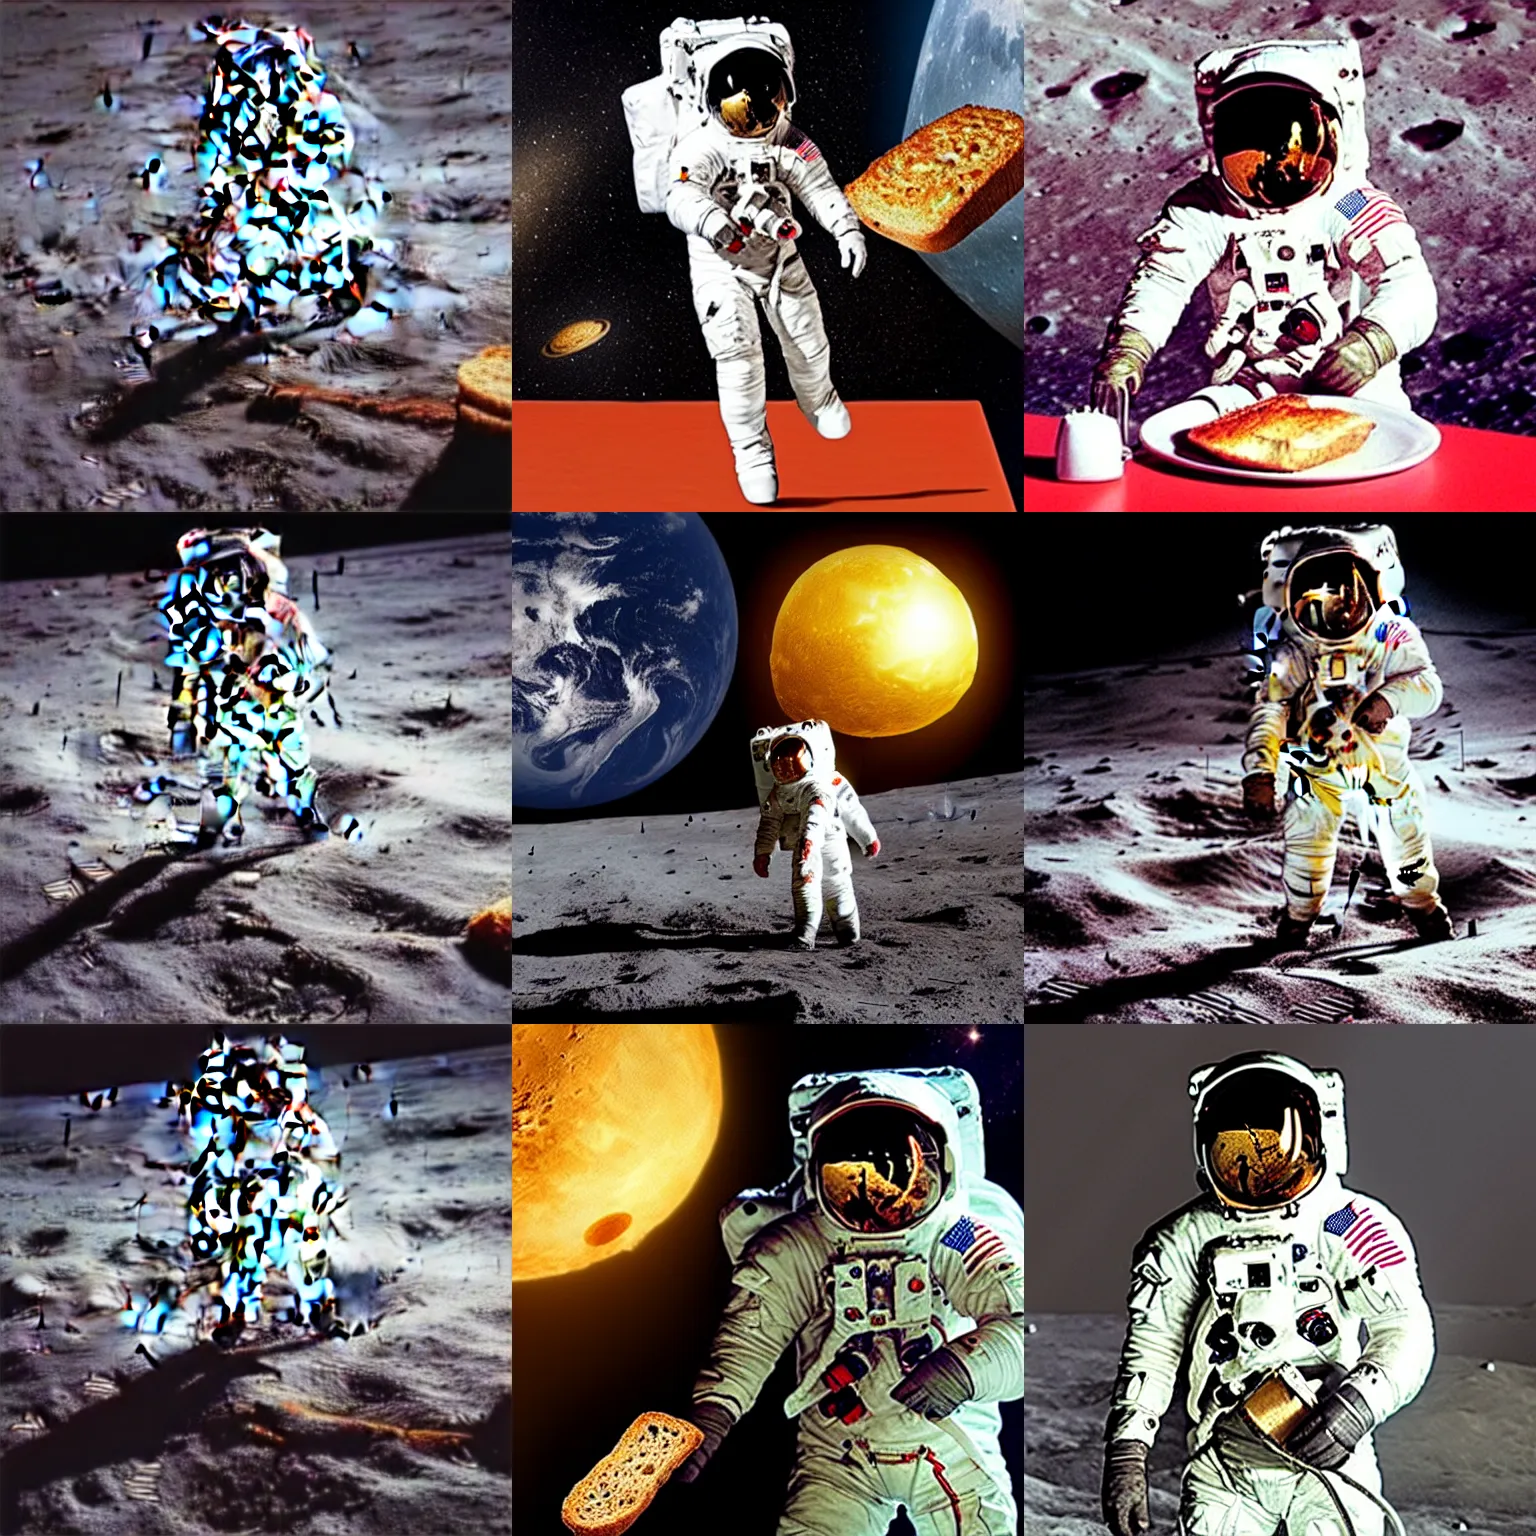 Prompt: A photo of an astronaut on the moon without his helmet eating garlic bread with knife and fork, the bread is on a red table, earth in the background